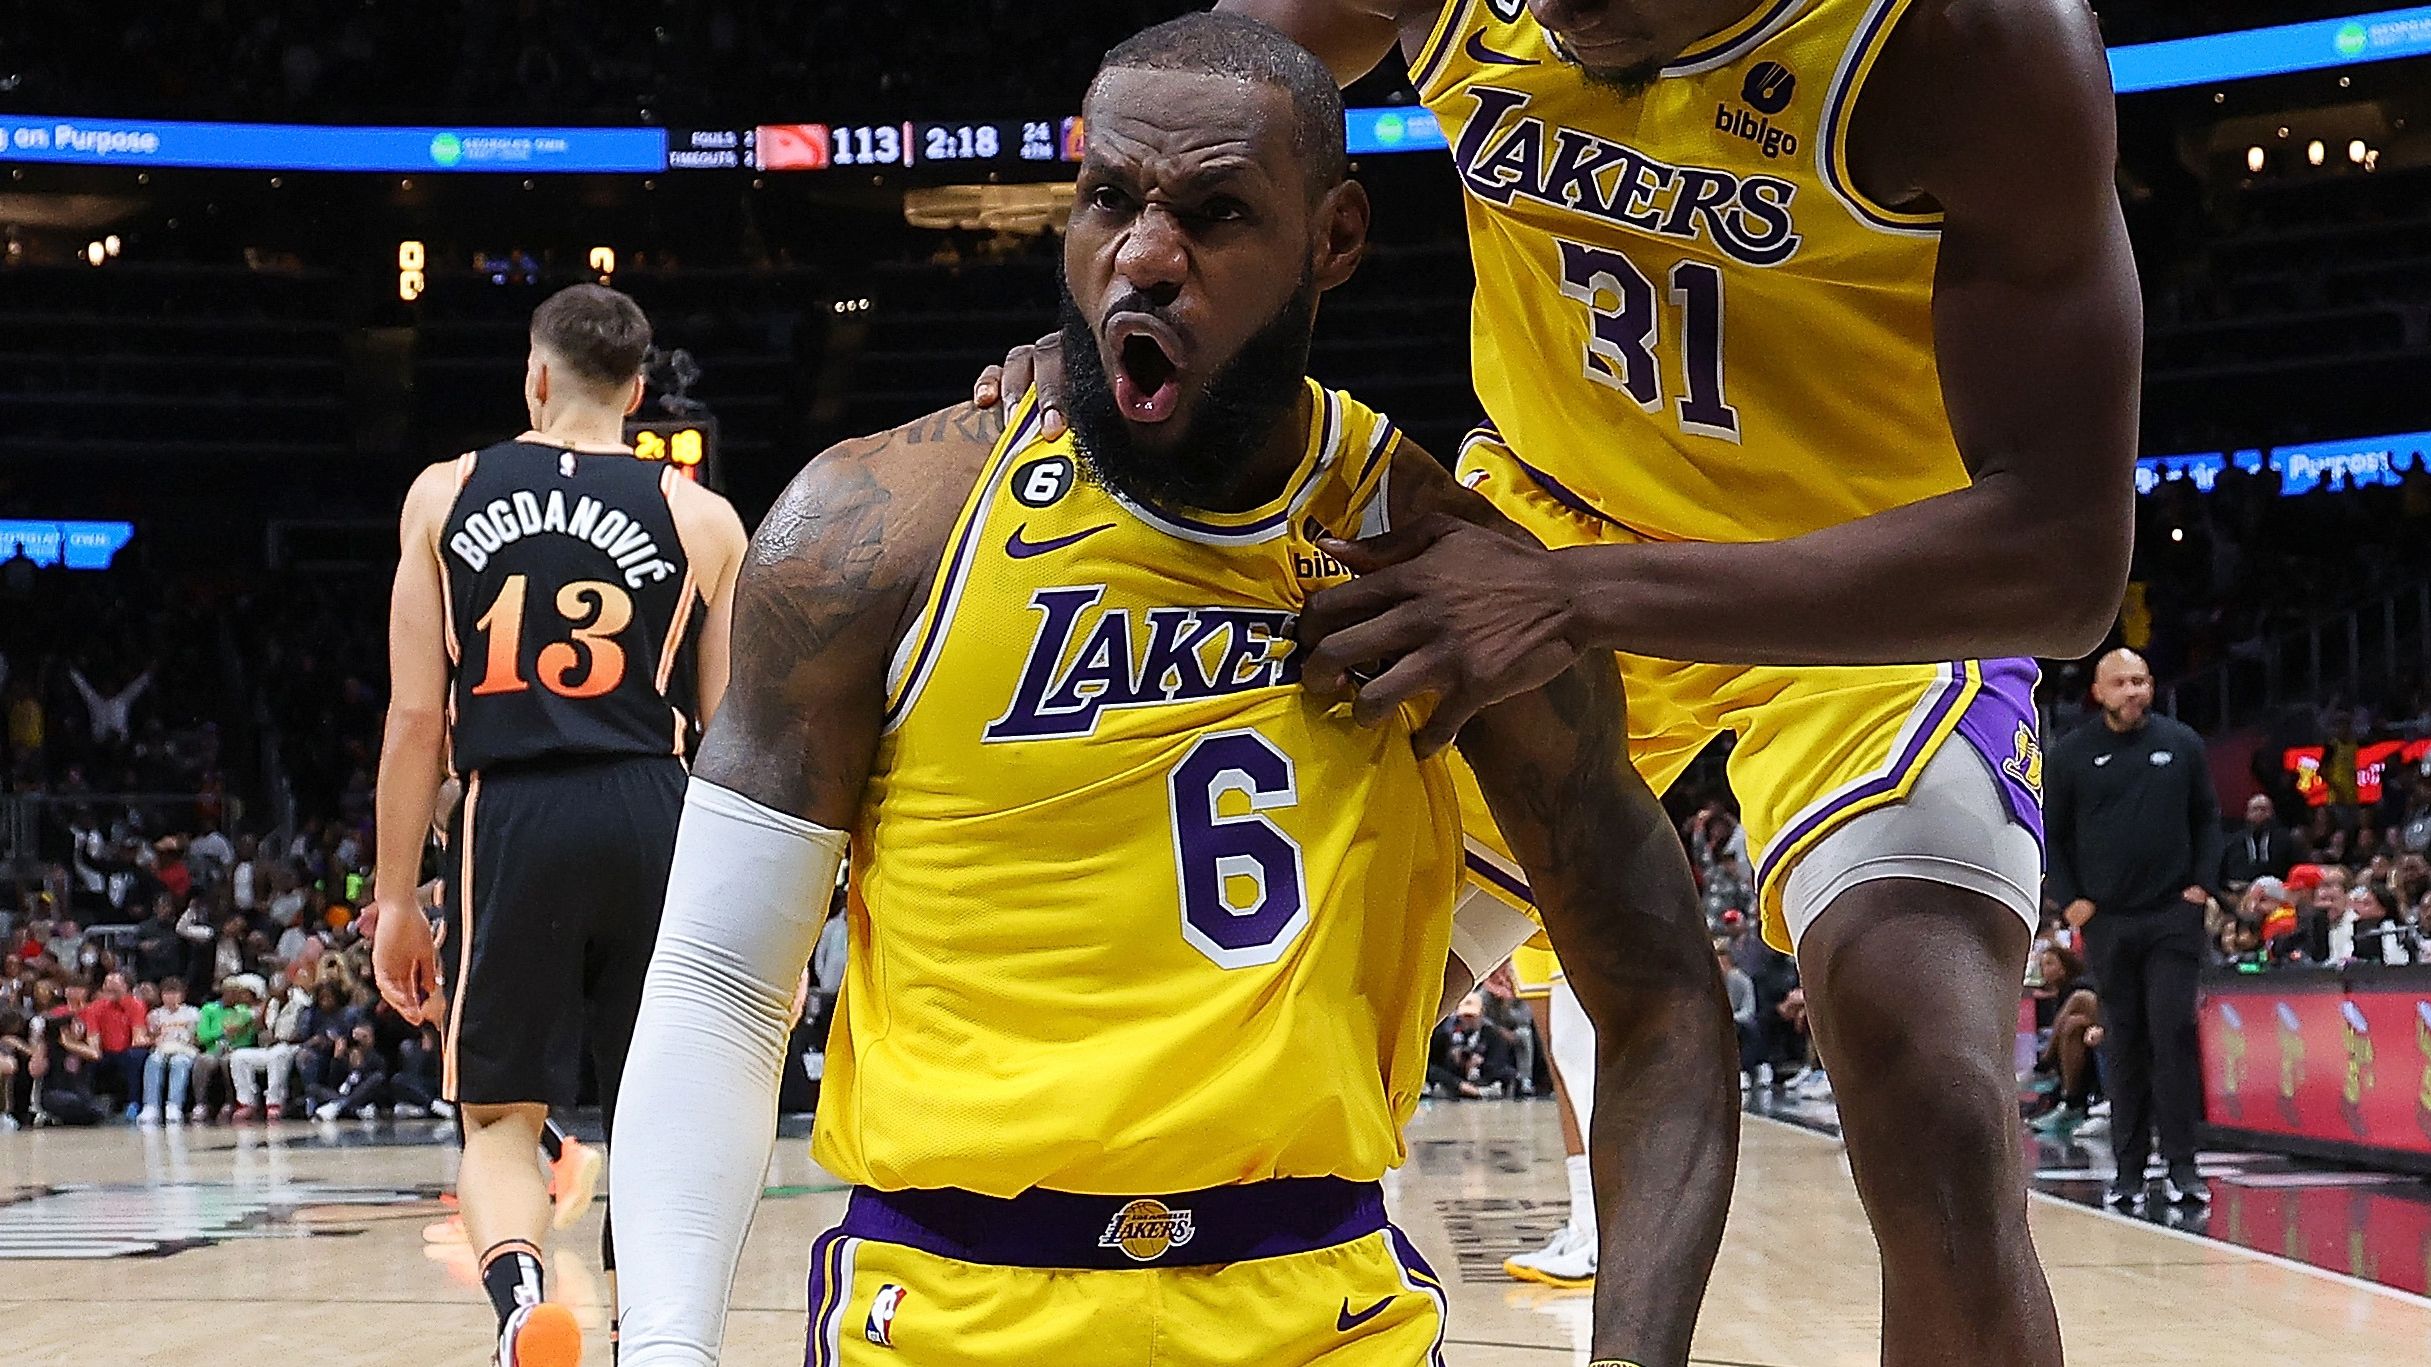 LeBron James #6 of the Los Angeles Lakers reacts with Thomas Bryant #31 after drawing a foul on a basket against the Atlanta Hawks during the fourth quarter at State Farm Arena on December 30, 2022 in Atlanta, Georgia. (Photo by Kevin C. Cox/Getty Images)